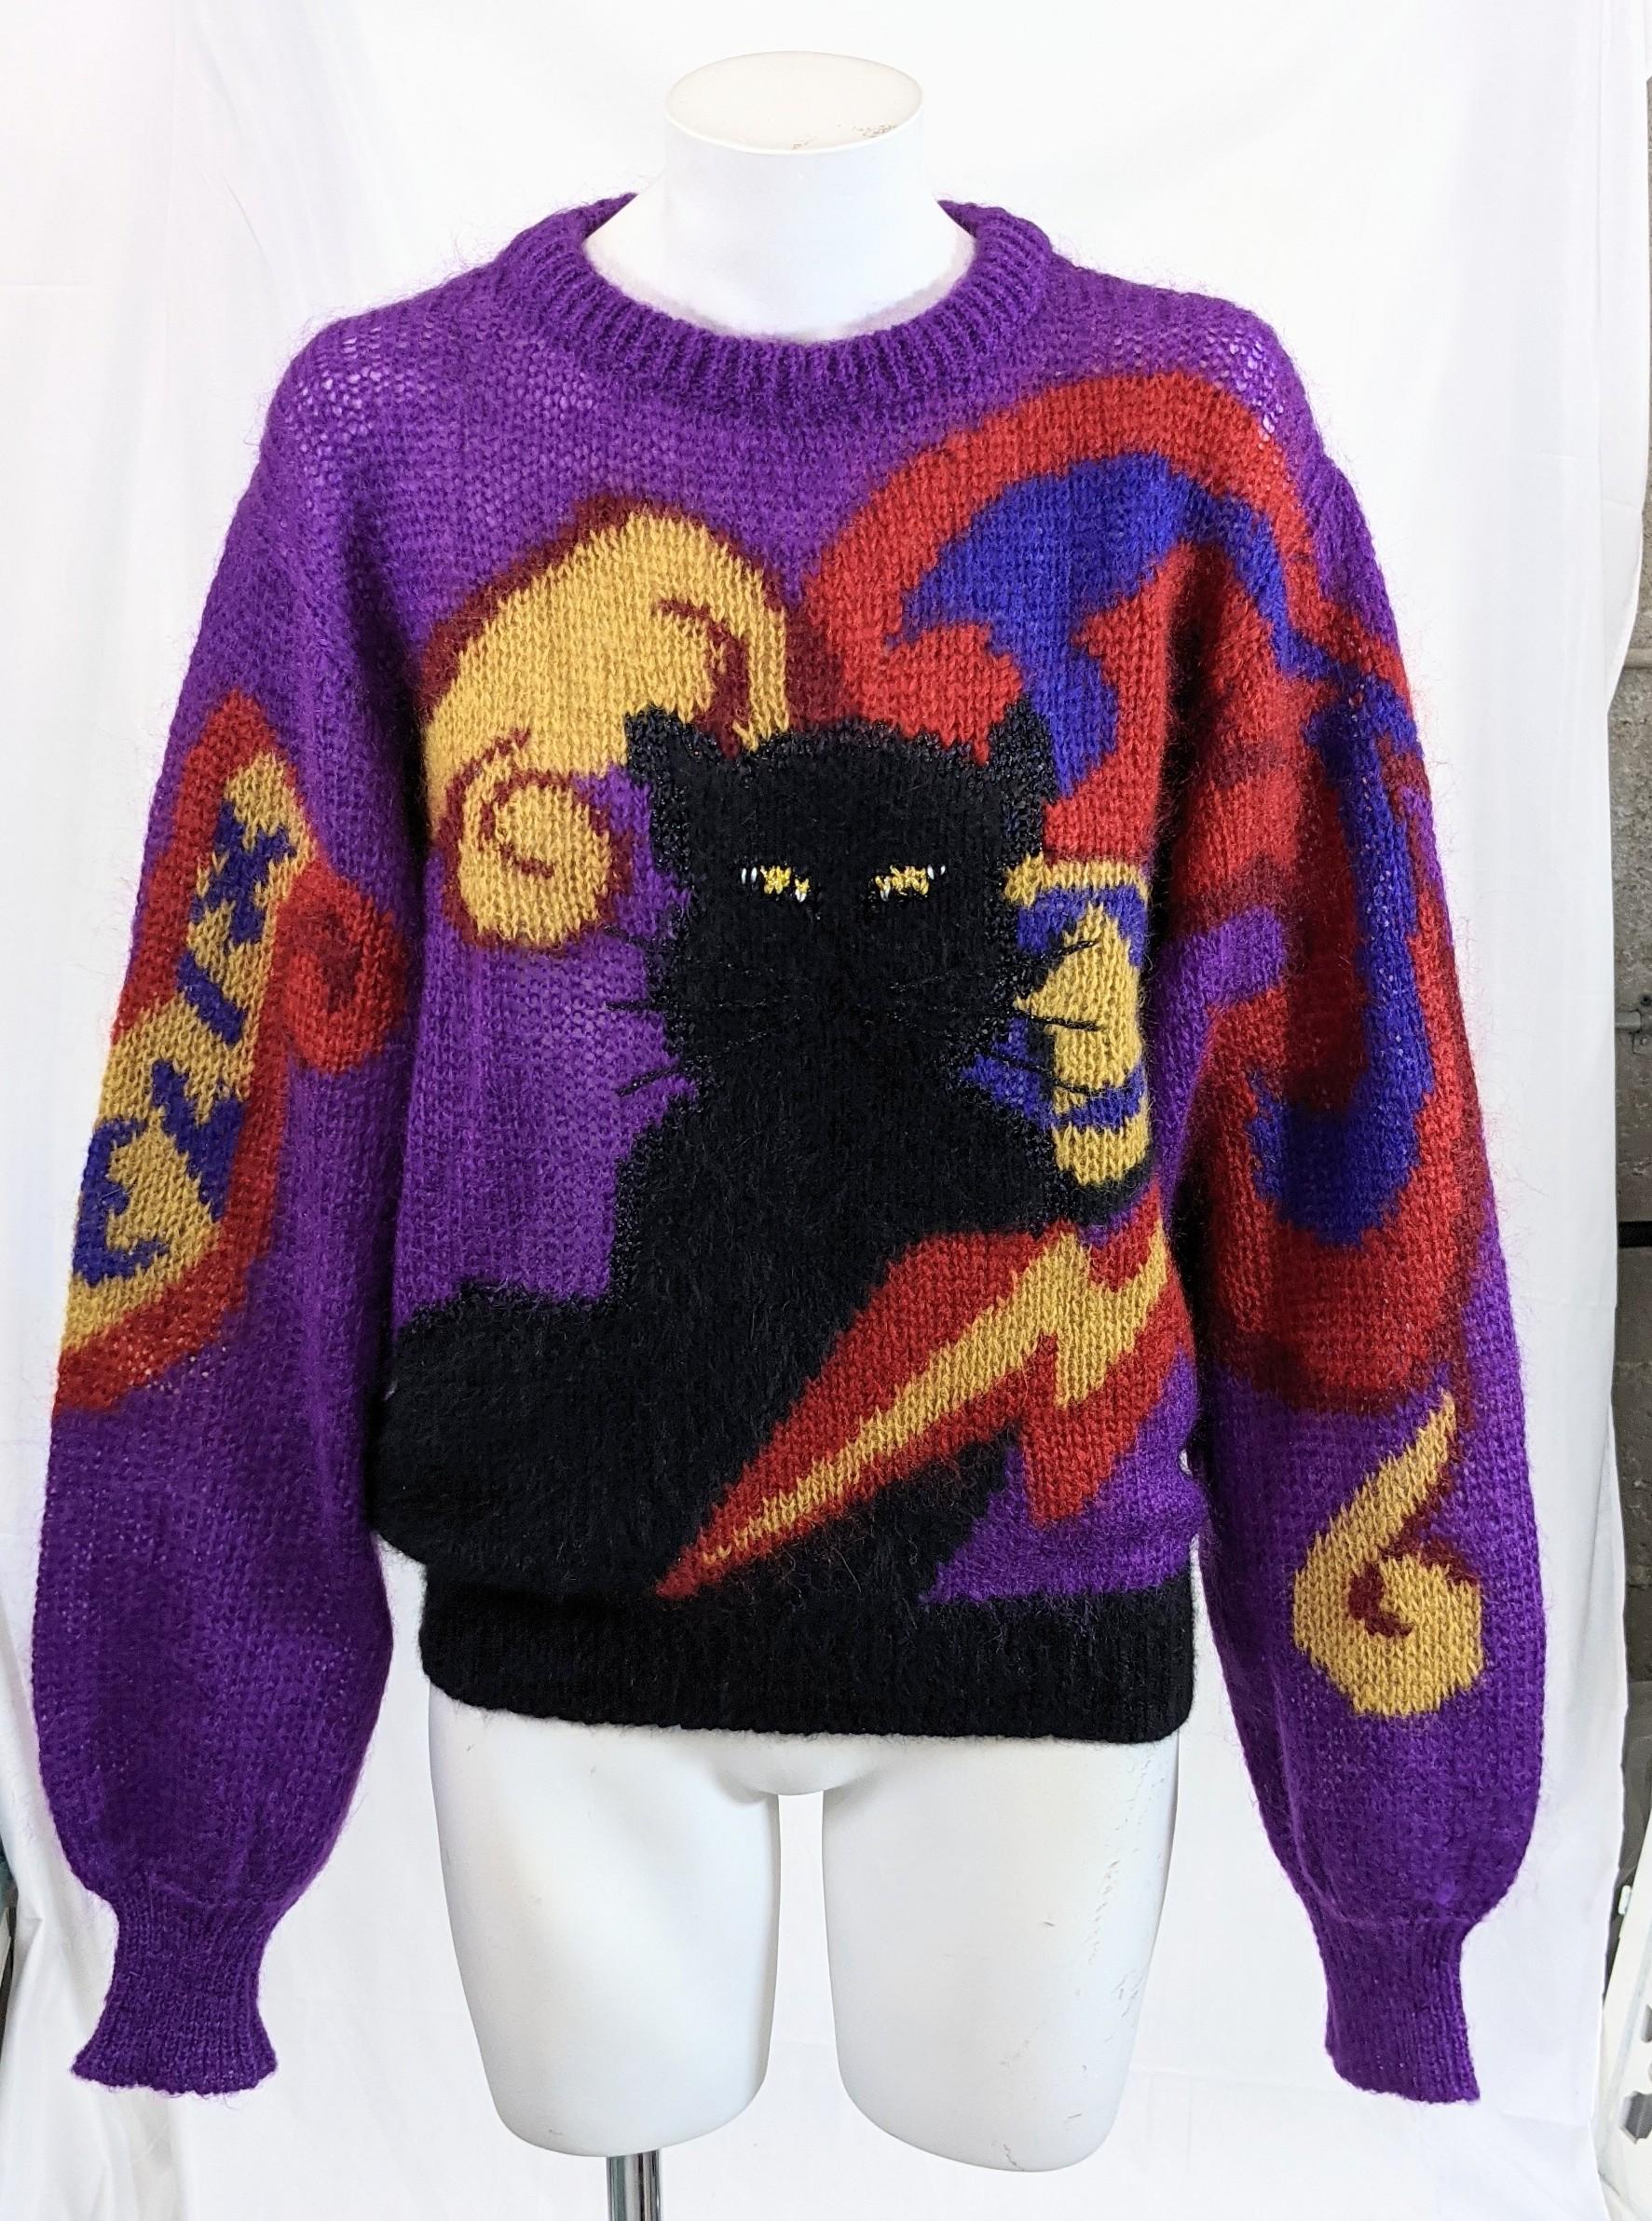 Charming and collectable Krizia Felix black cat oversized signature pullover crewneck sweater in soft knit blend. 